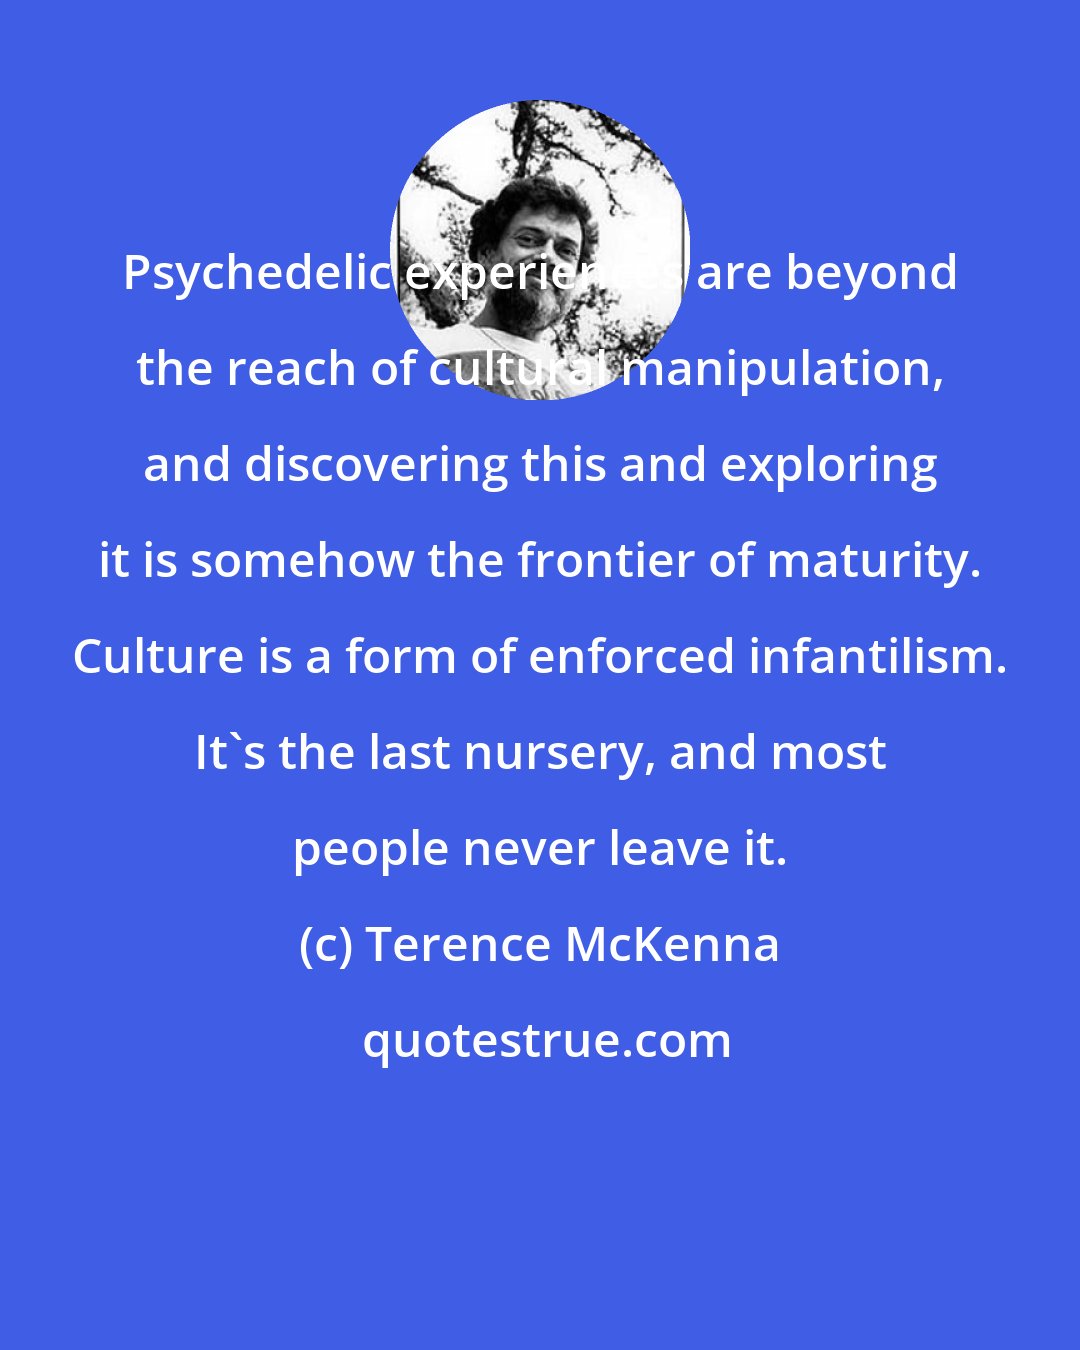 Terence McKenna: Psychedelic experiences are beyond the reach of cultural manipulation, and discovering this and exploring it is somehow the frontier of maturity. Culture is a form of enforced infantilism. It's the last nursery, and most people never leave it.